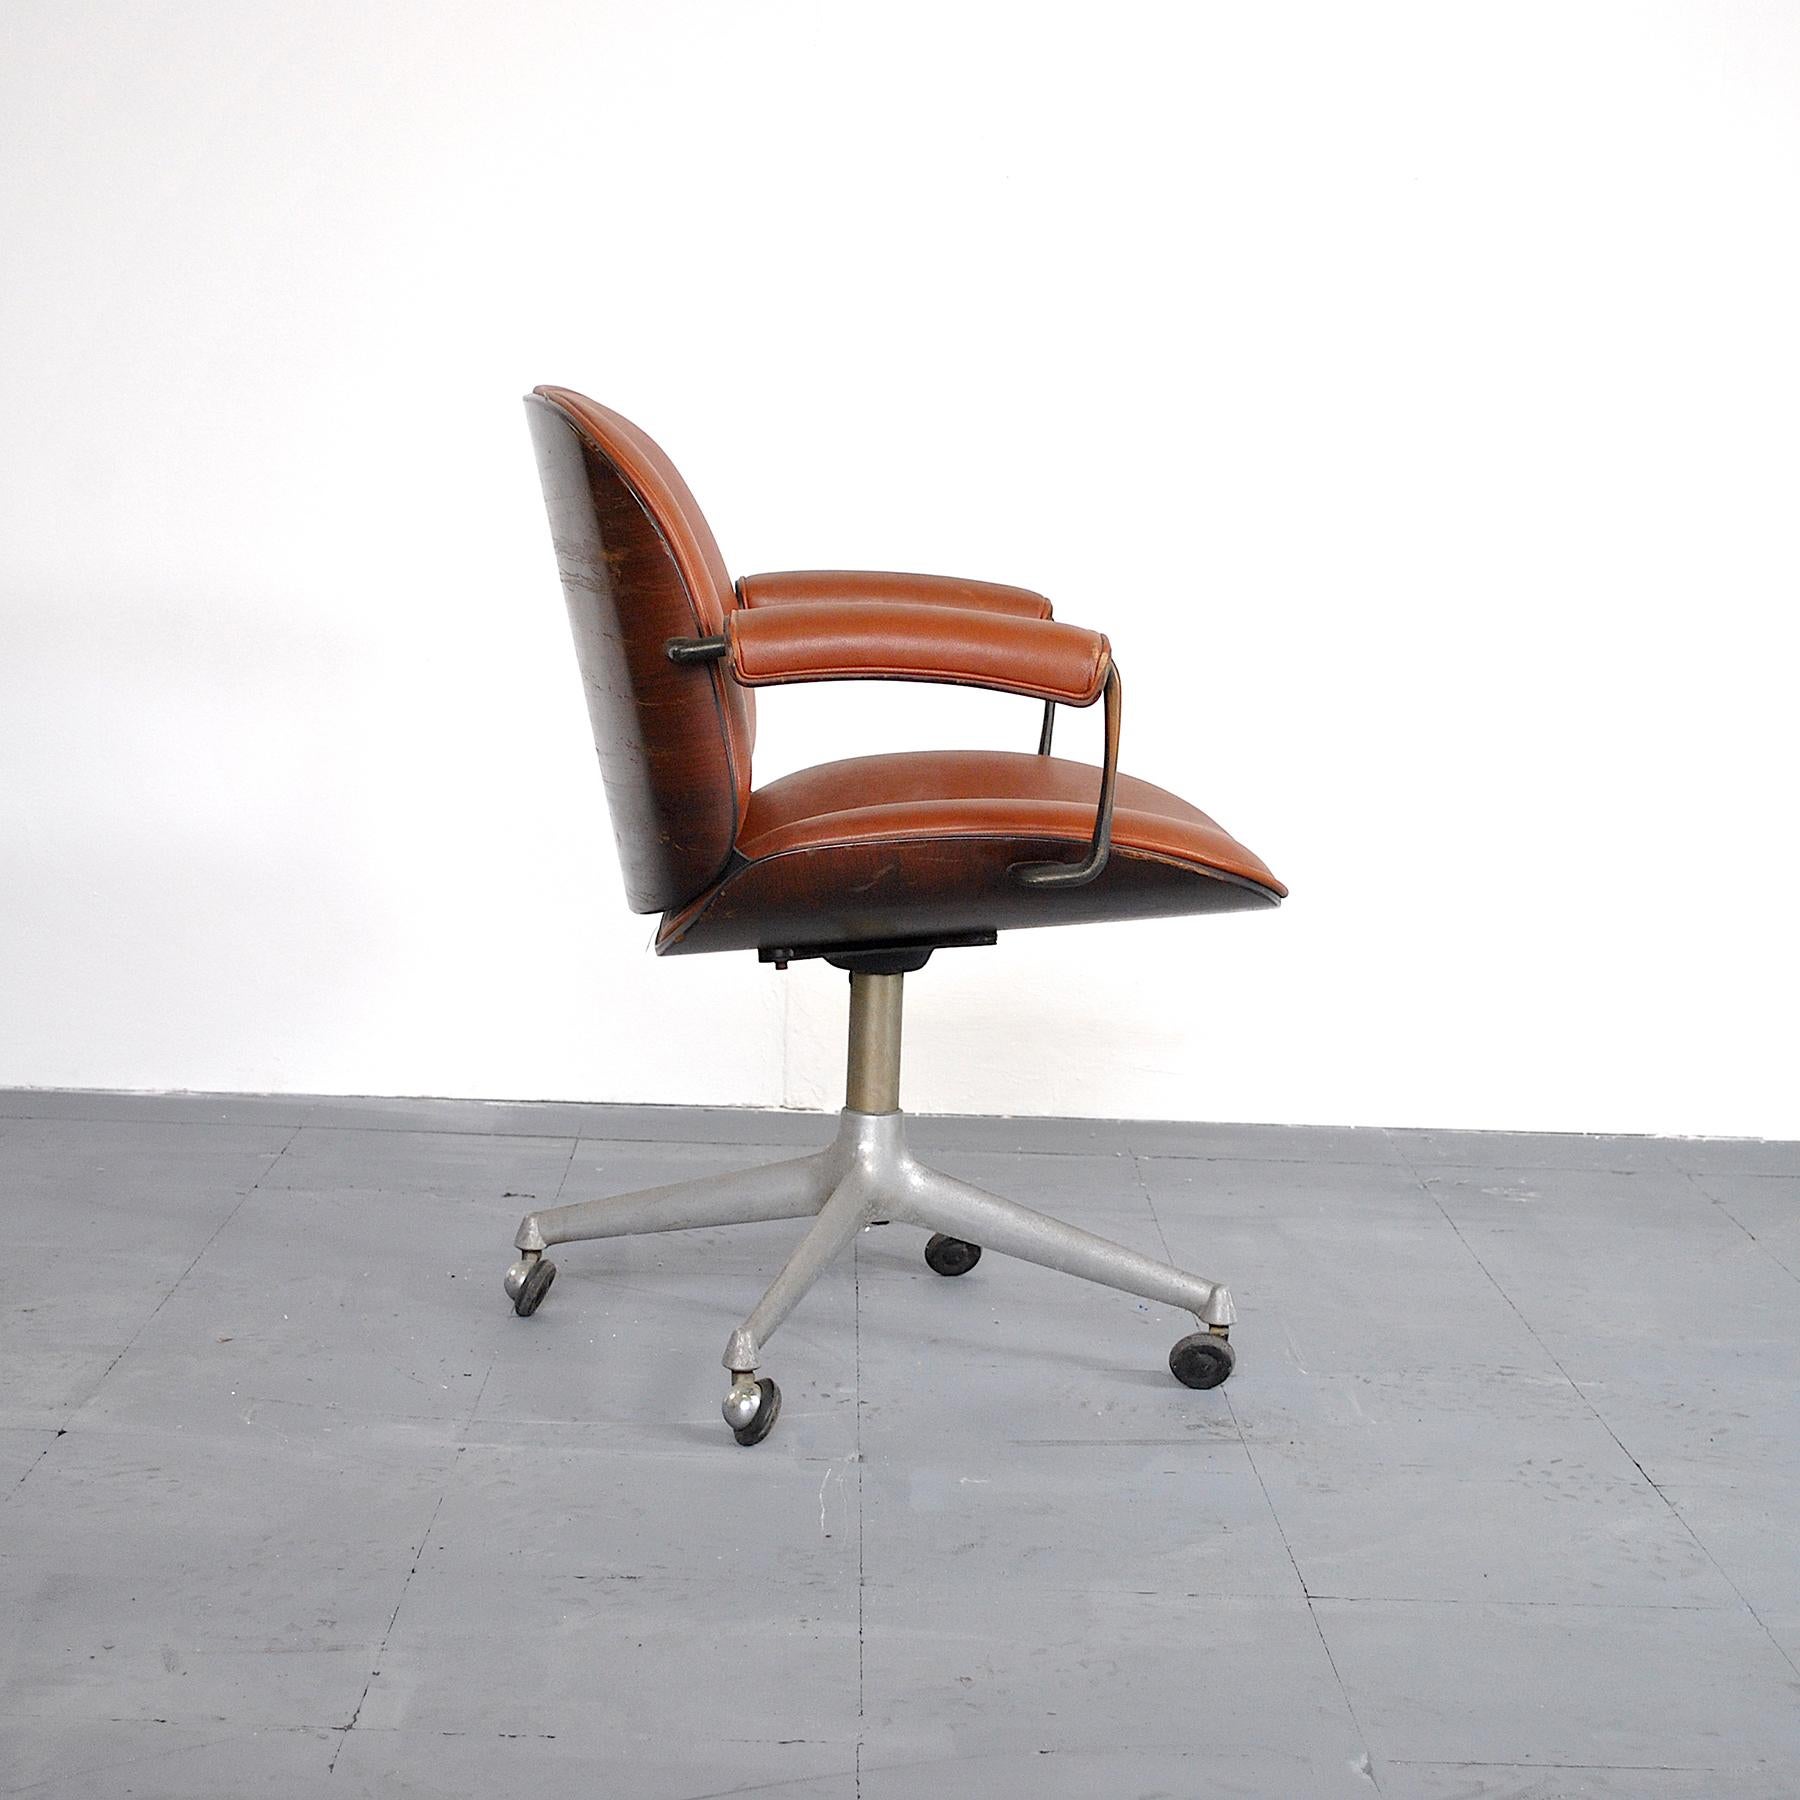 Swivel office chair by Ico Parisi for MIM Roma wooden frame with leather seat.